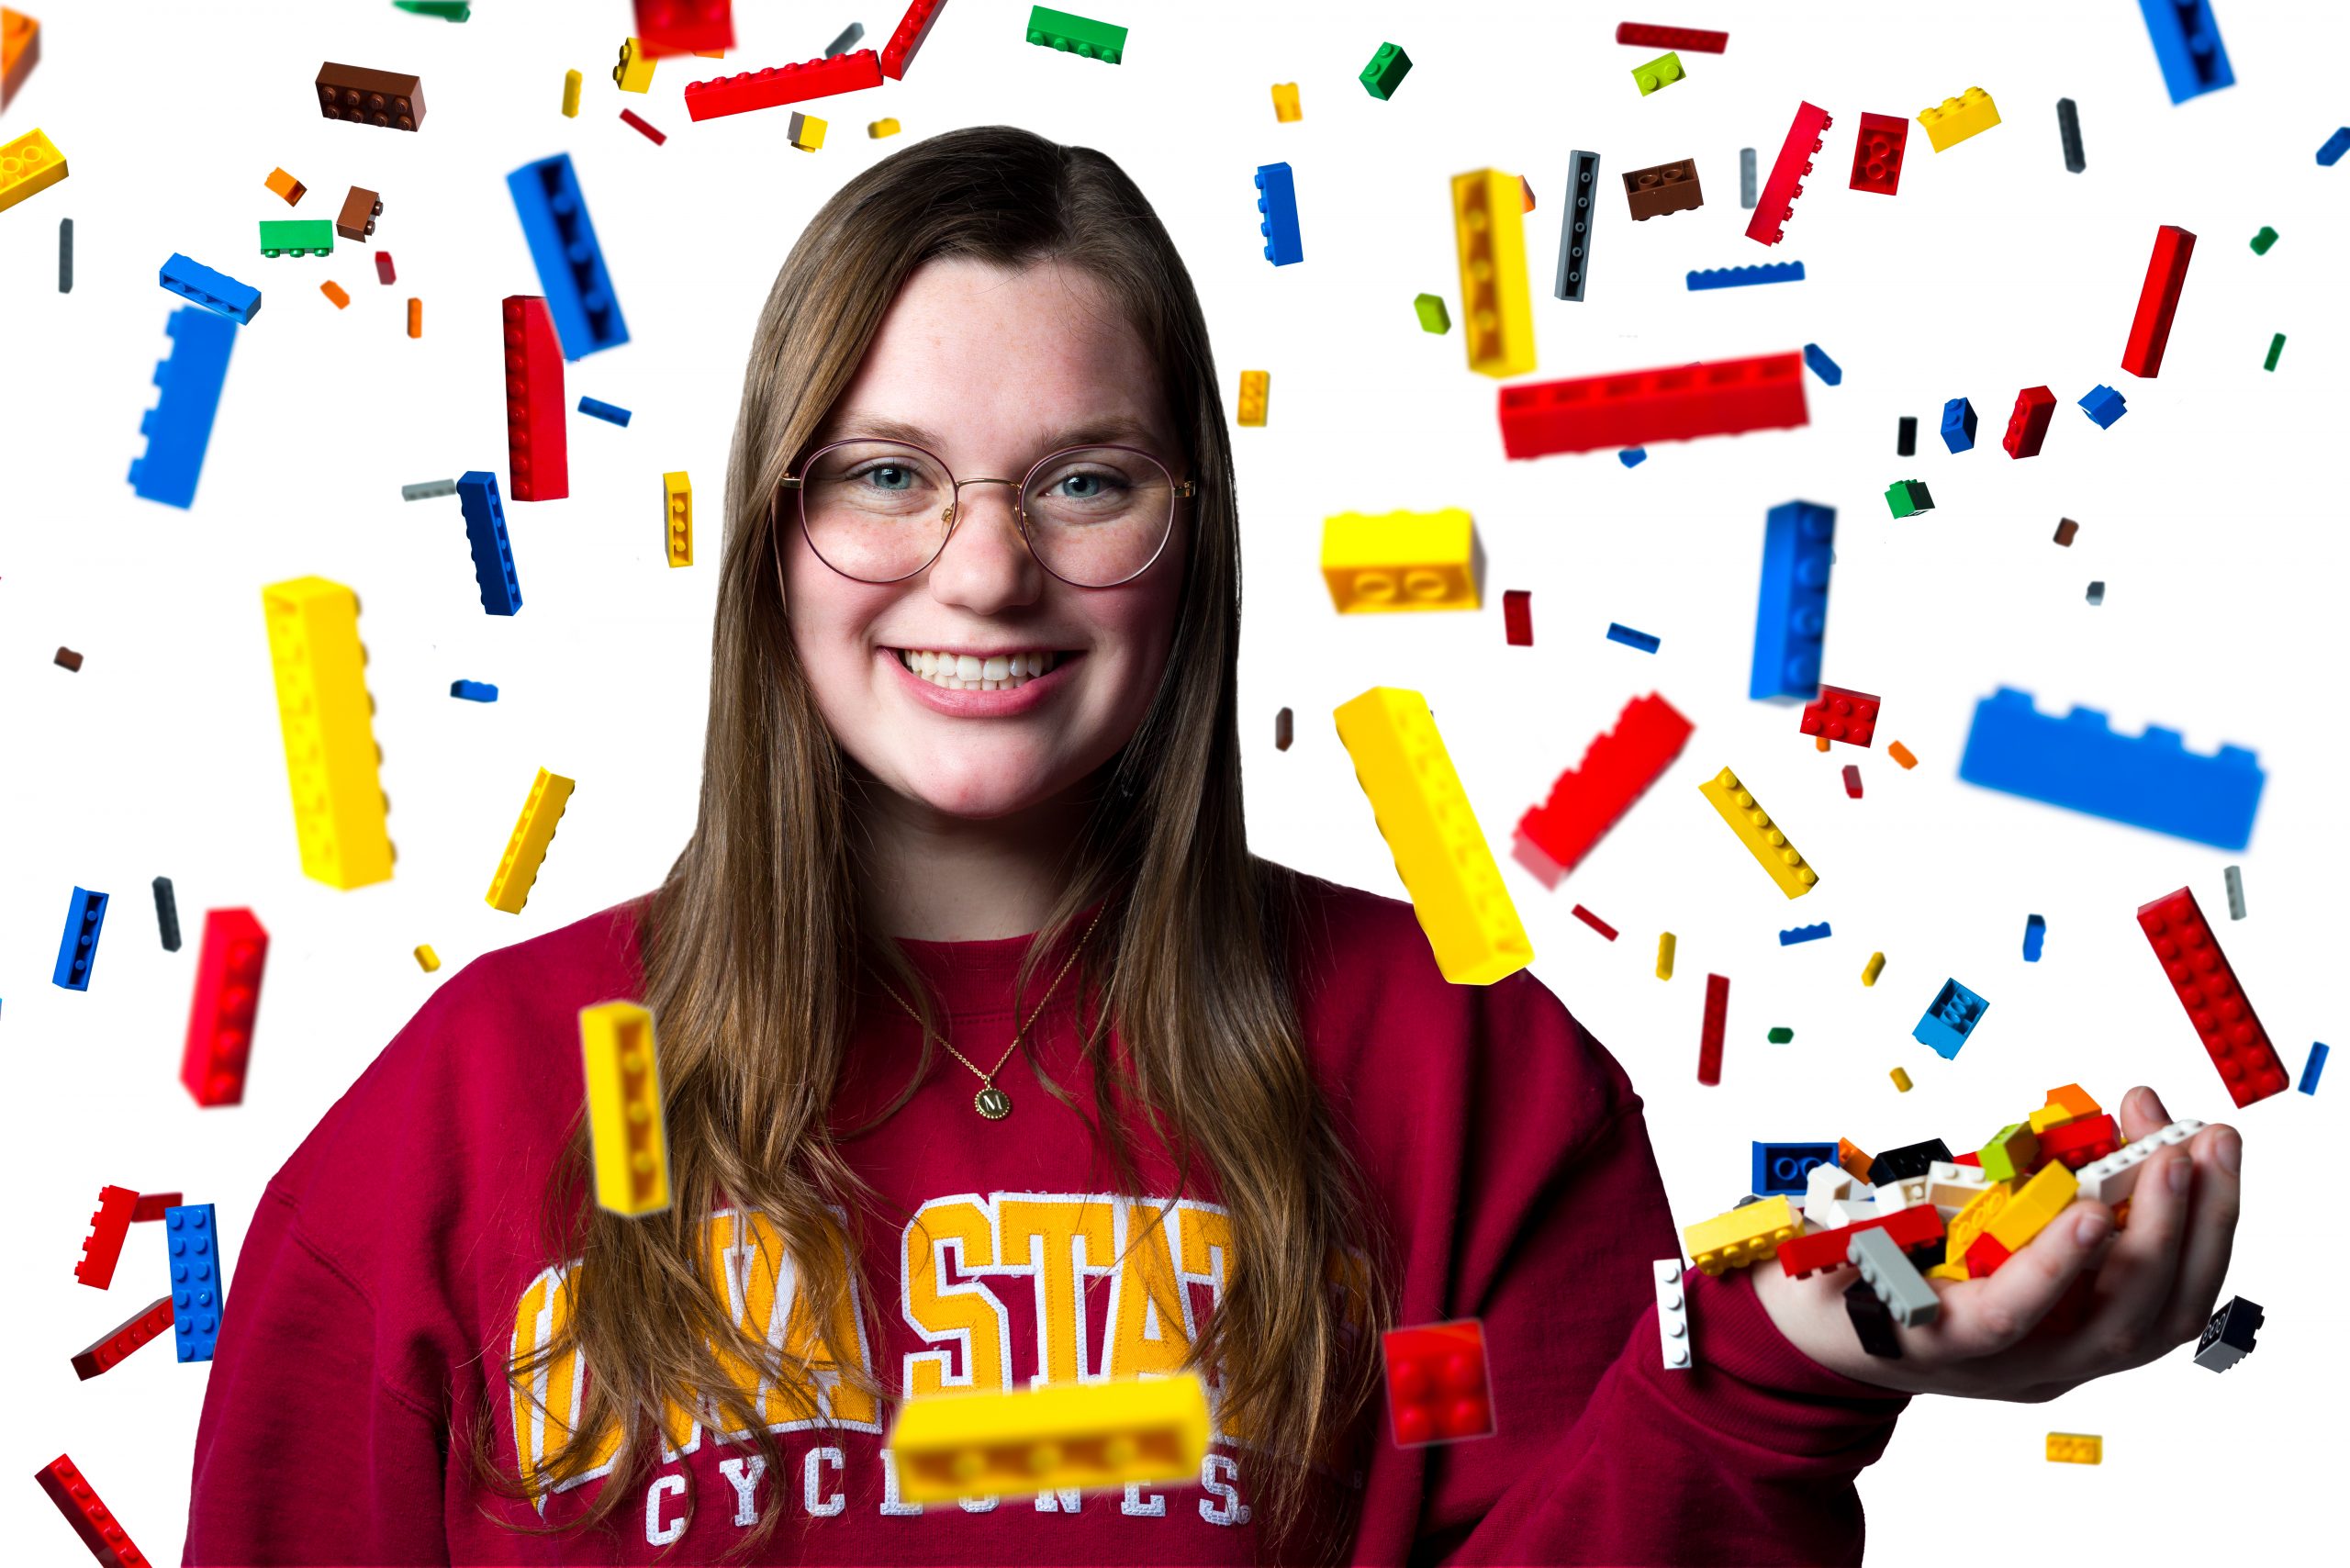 When she was a kid, Samantha Guido’s big sister told her that engineering was like building with LEGO: a way to make new things from scratch.